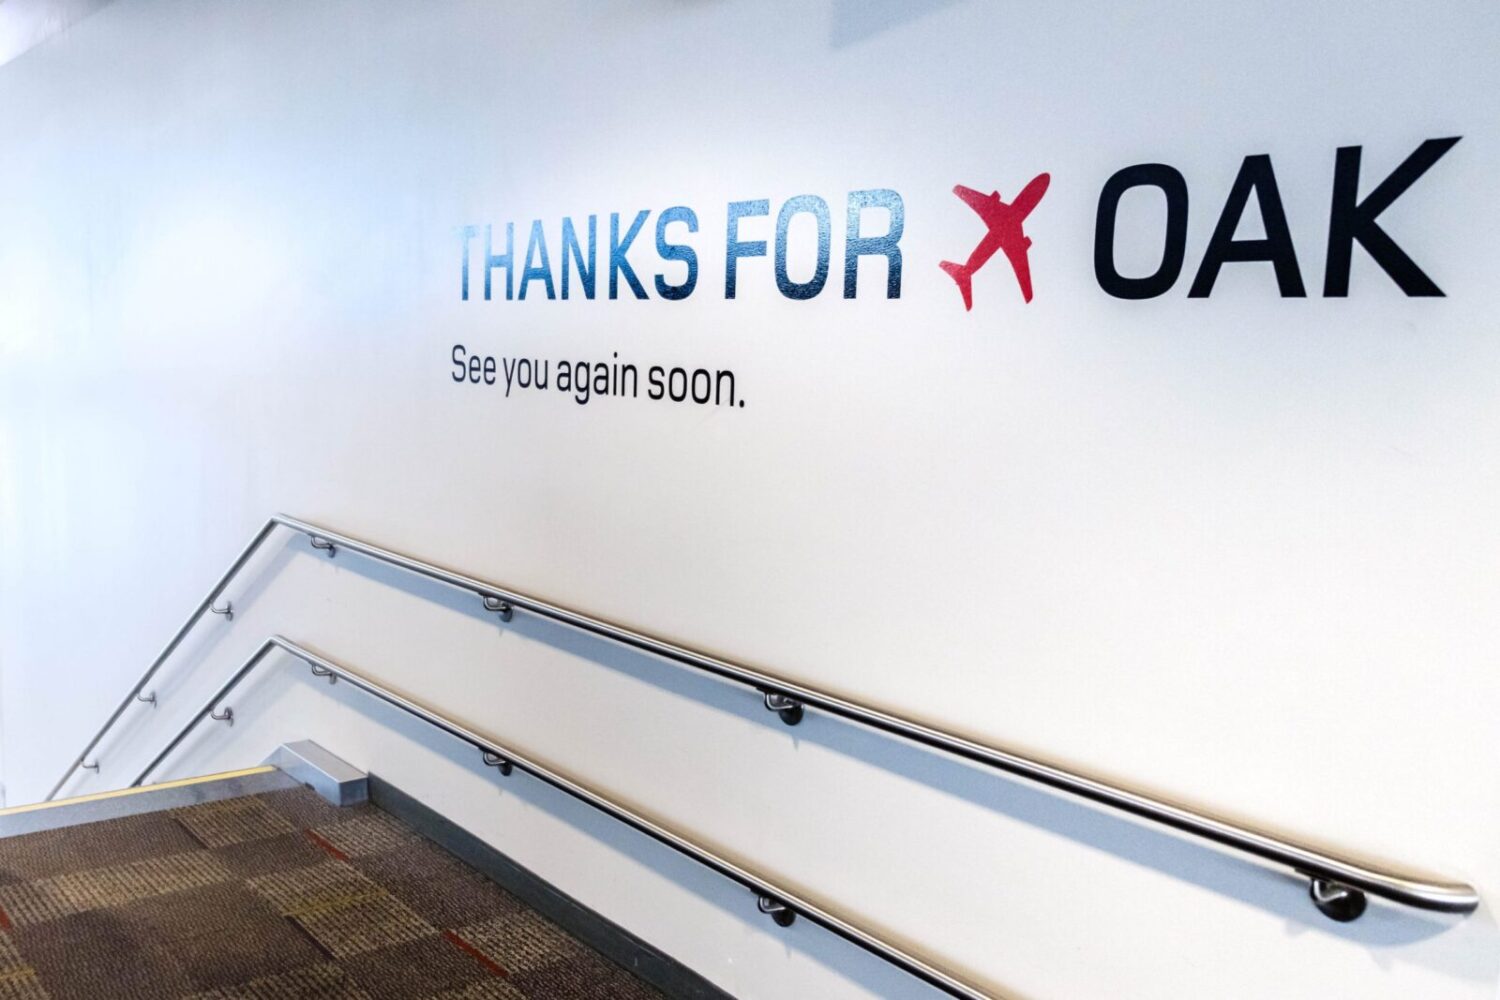 Is it OK for both SFO & OAK airports to have ‘San Francisco in their names?